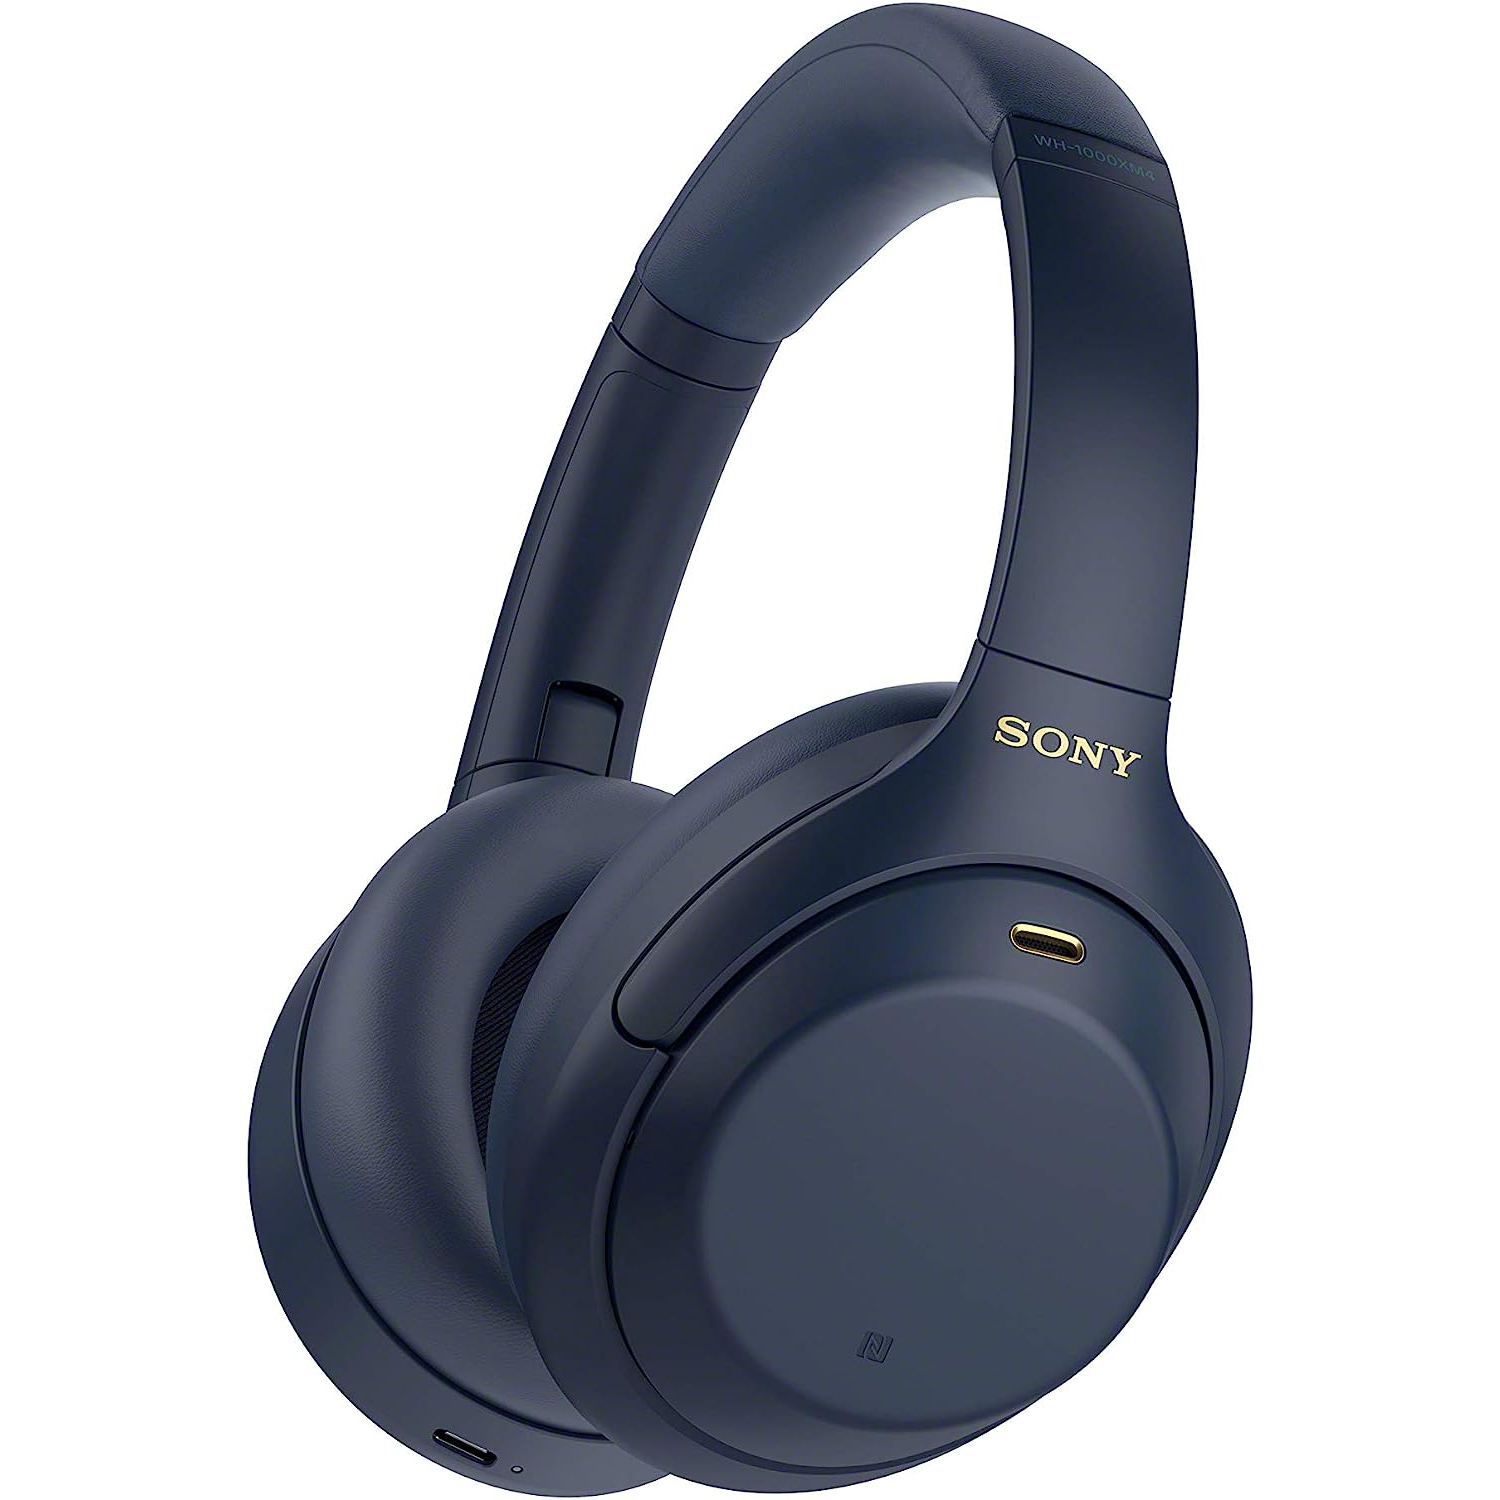 Refurbished (Excellent) - Sony WH-1000XM4 Over-Ear Noise Cancelling Bluetooth Headphones - Blue